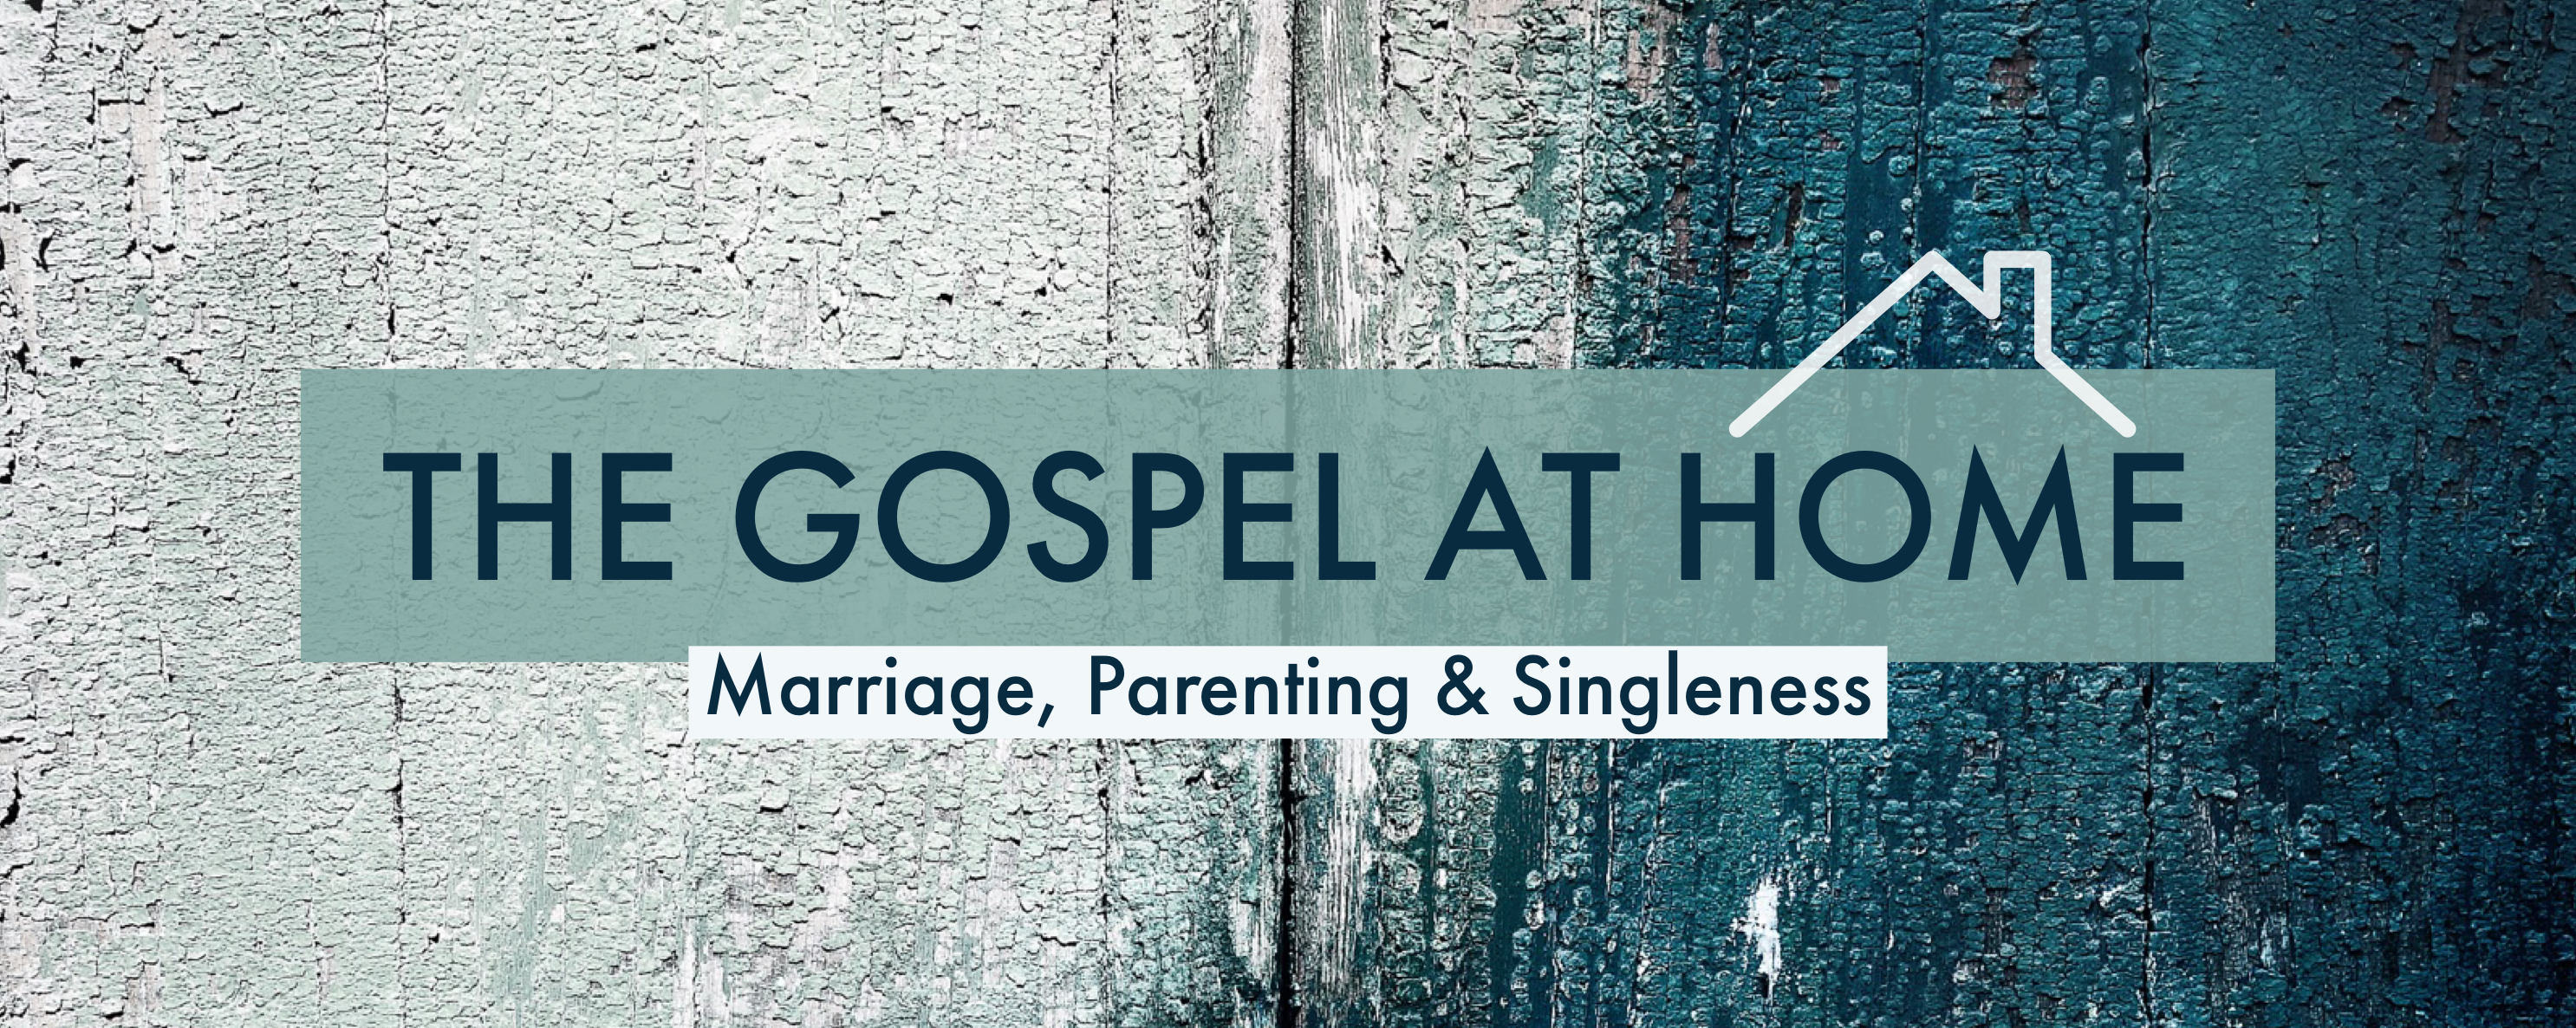 The Gospel at Home: Marriage, Parenting and Singleness banner